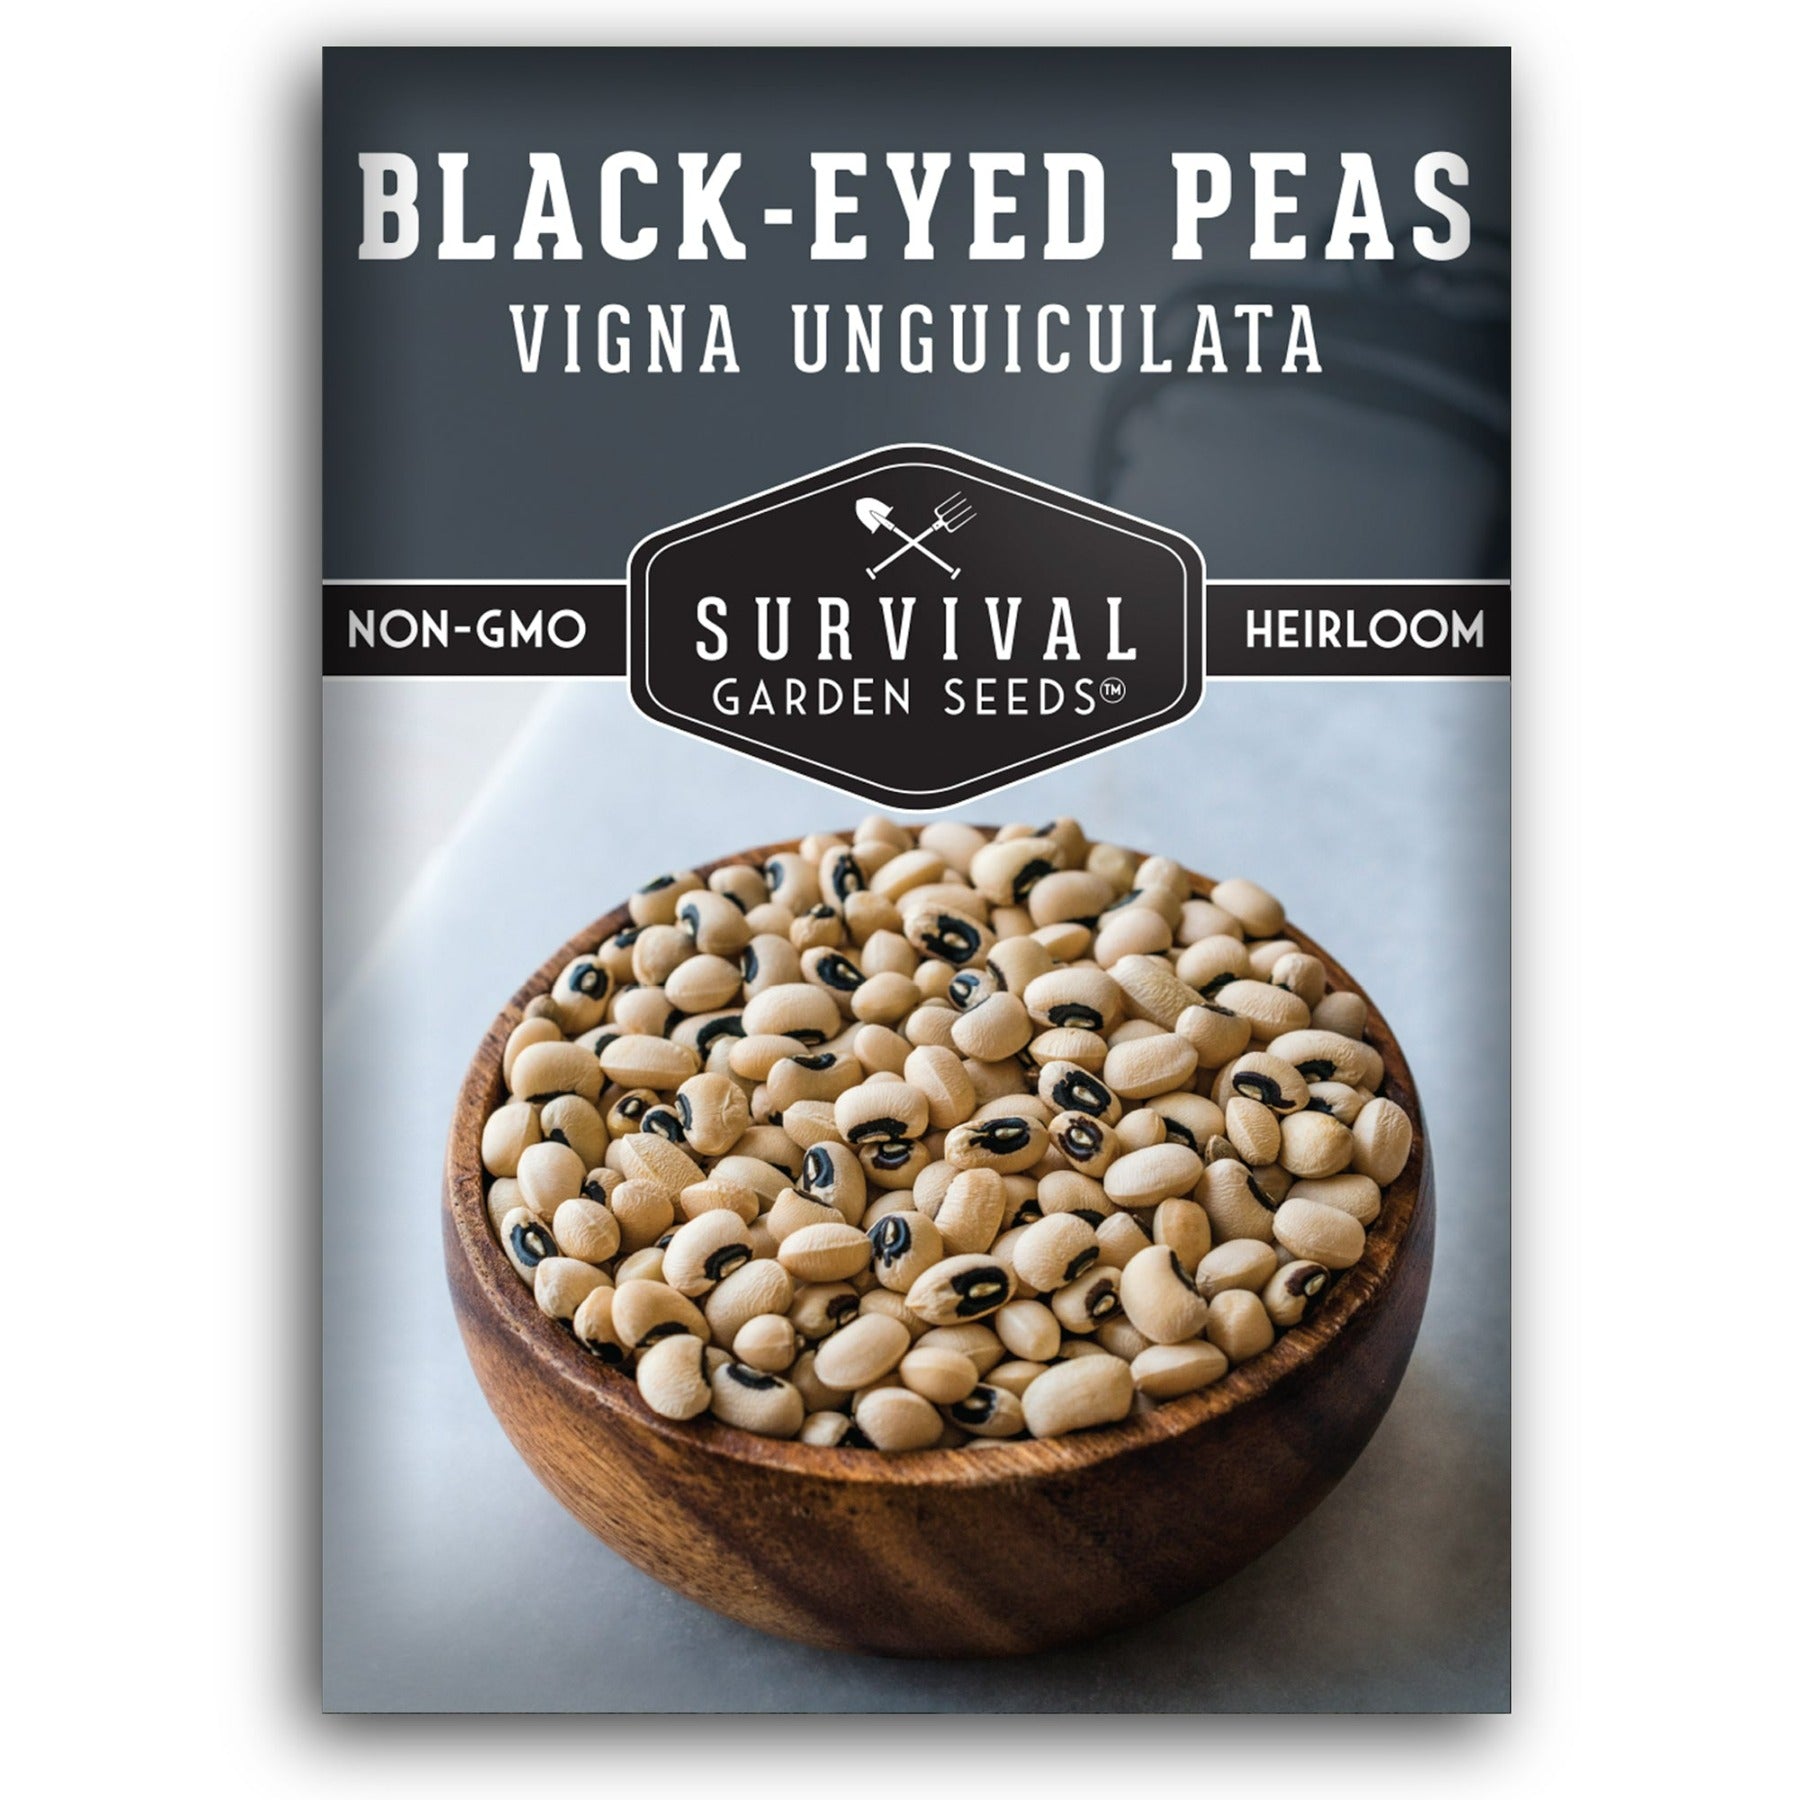 Black-eyed Peas seeds for planting